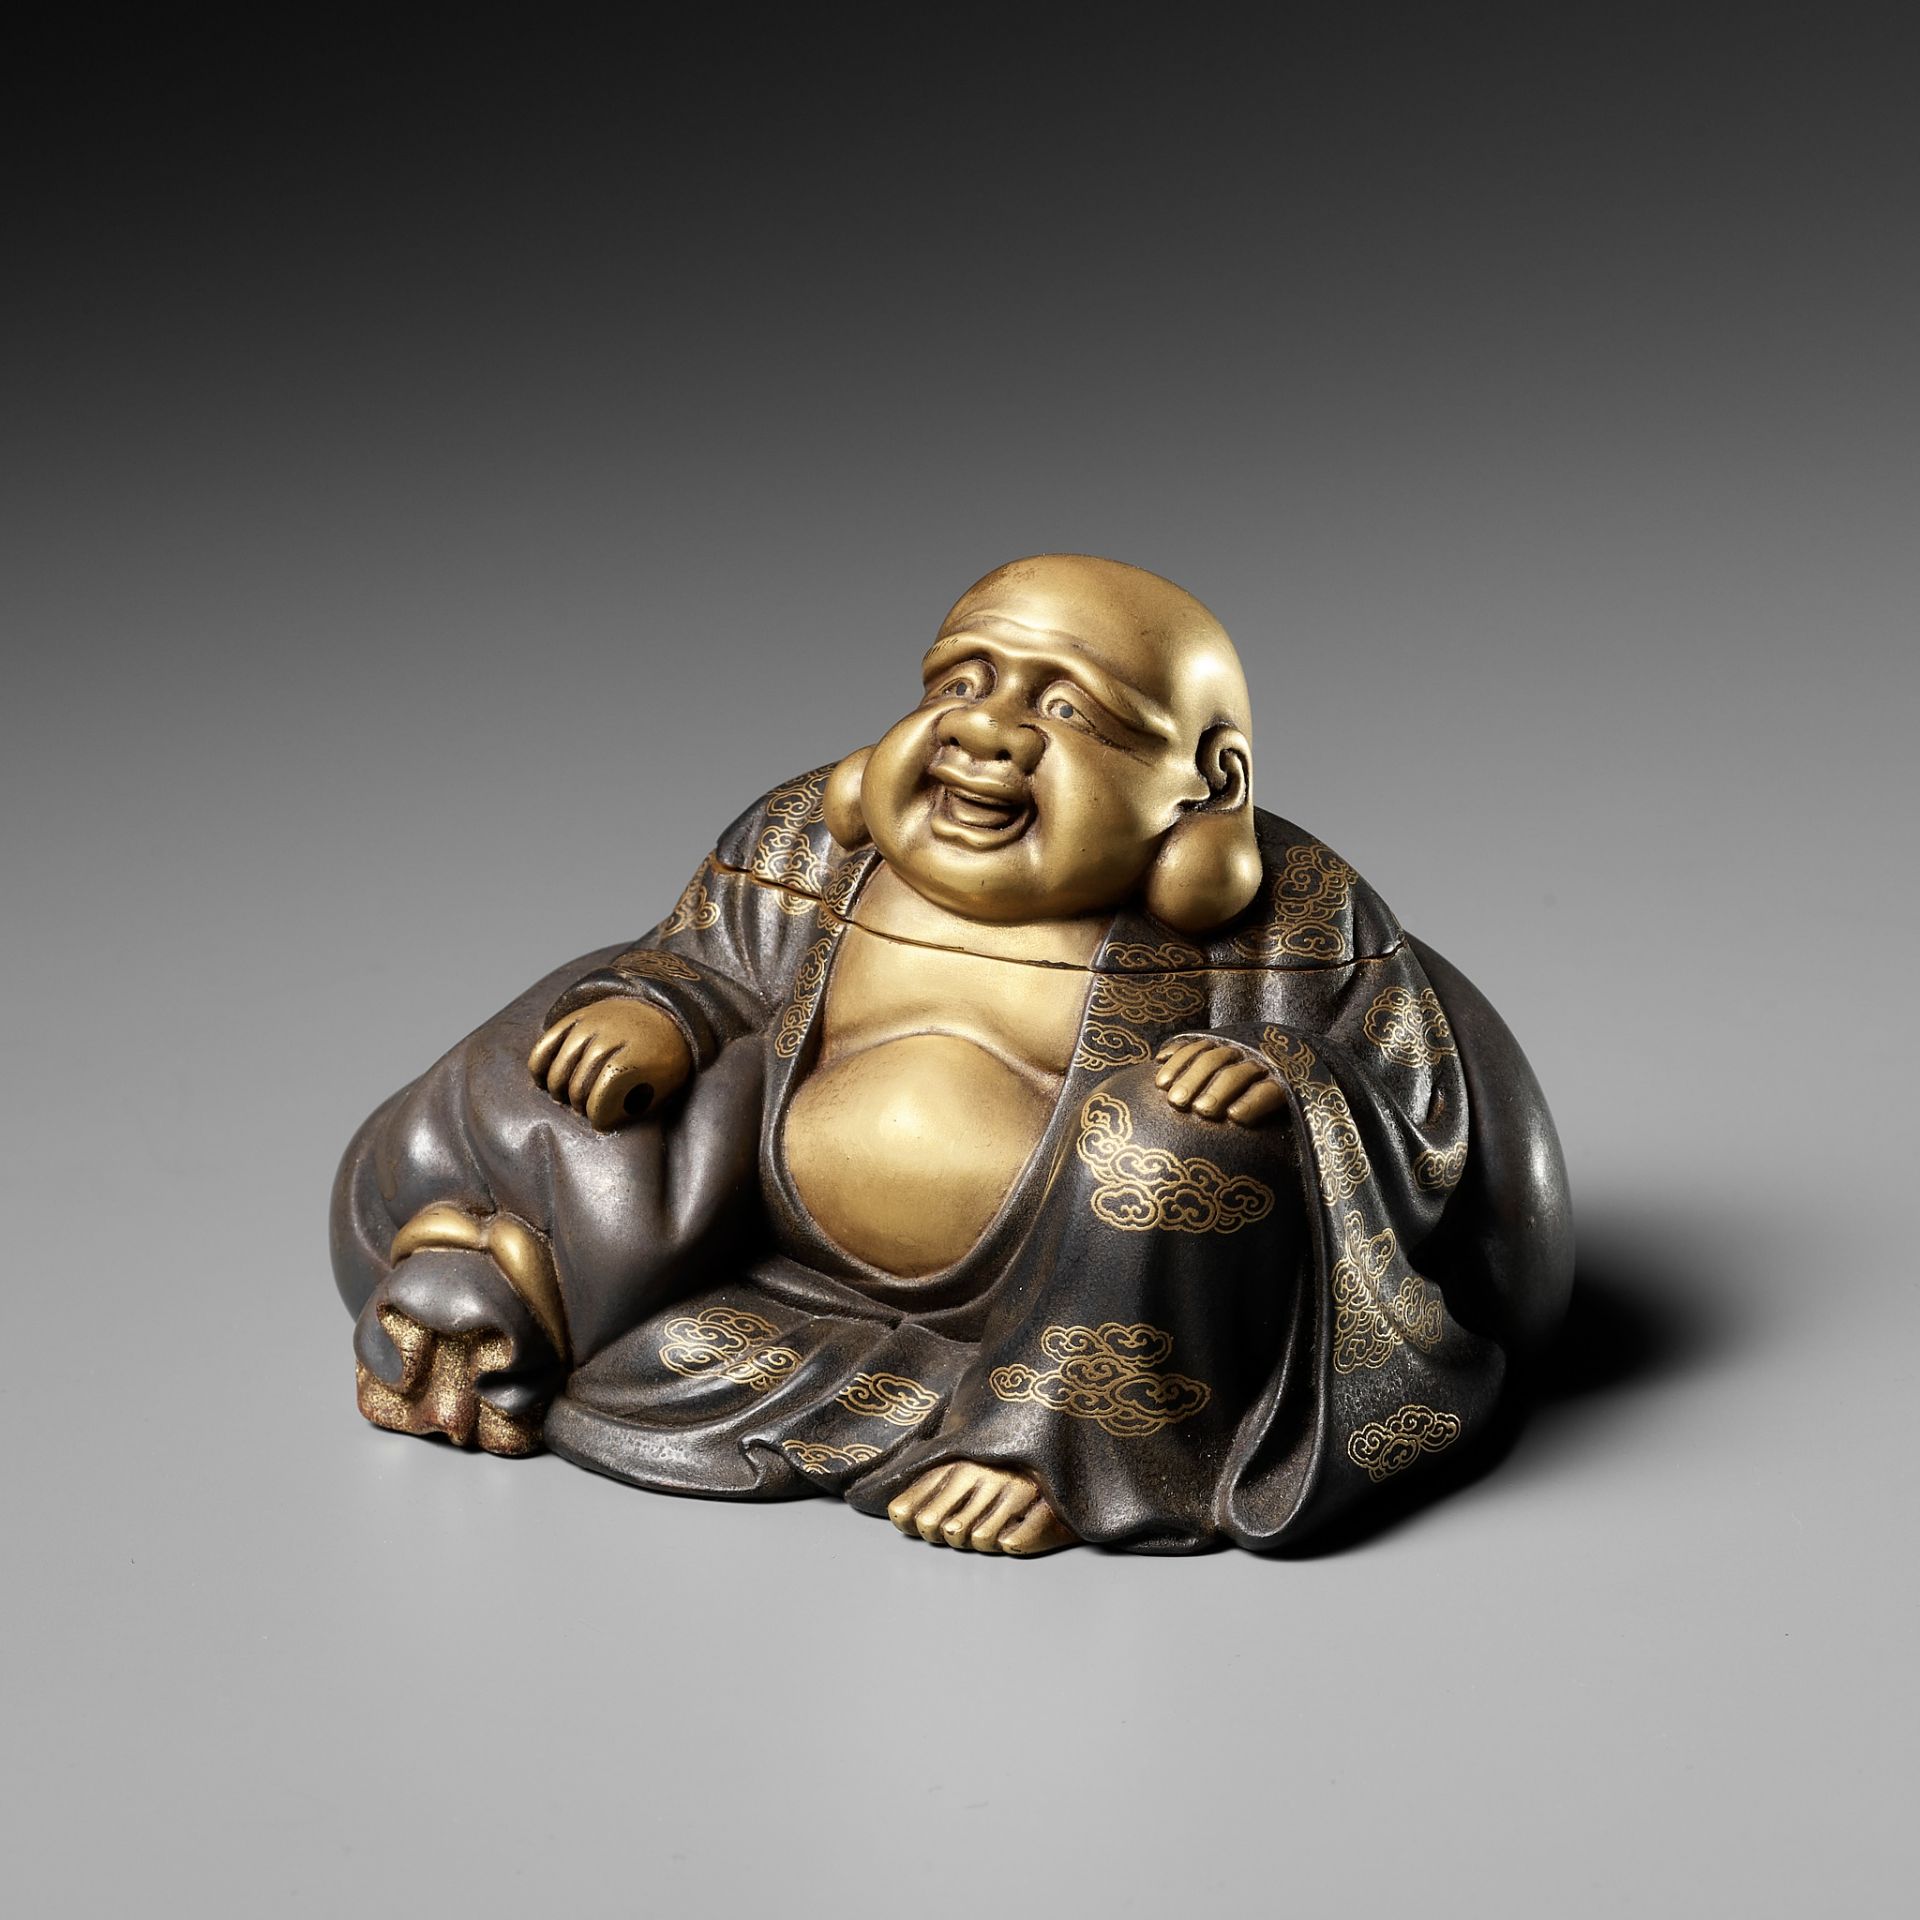 A FINE LACQUER KOGO (INCENSE BOX) AND COVER IN THE FORM OF HOTEI